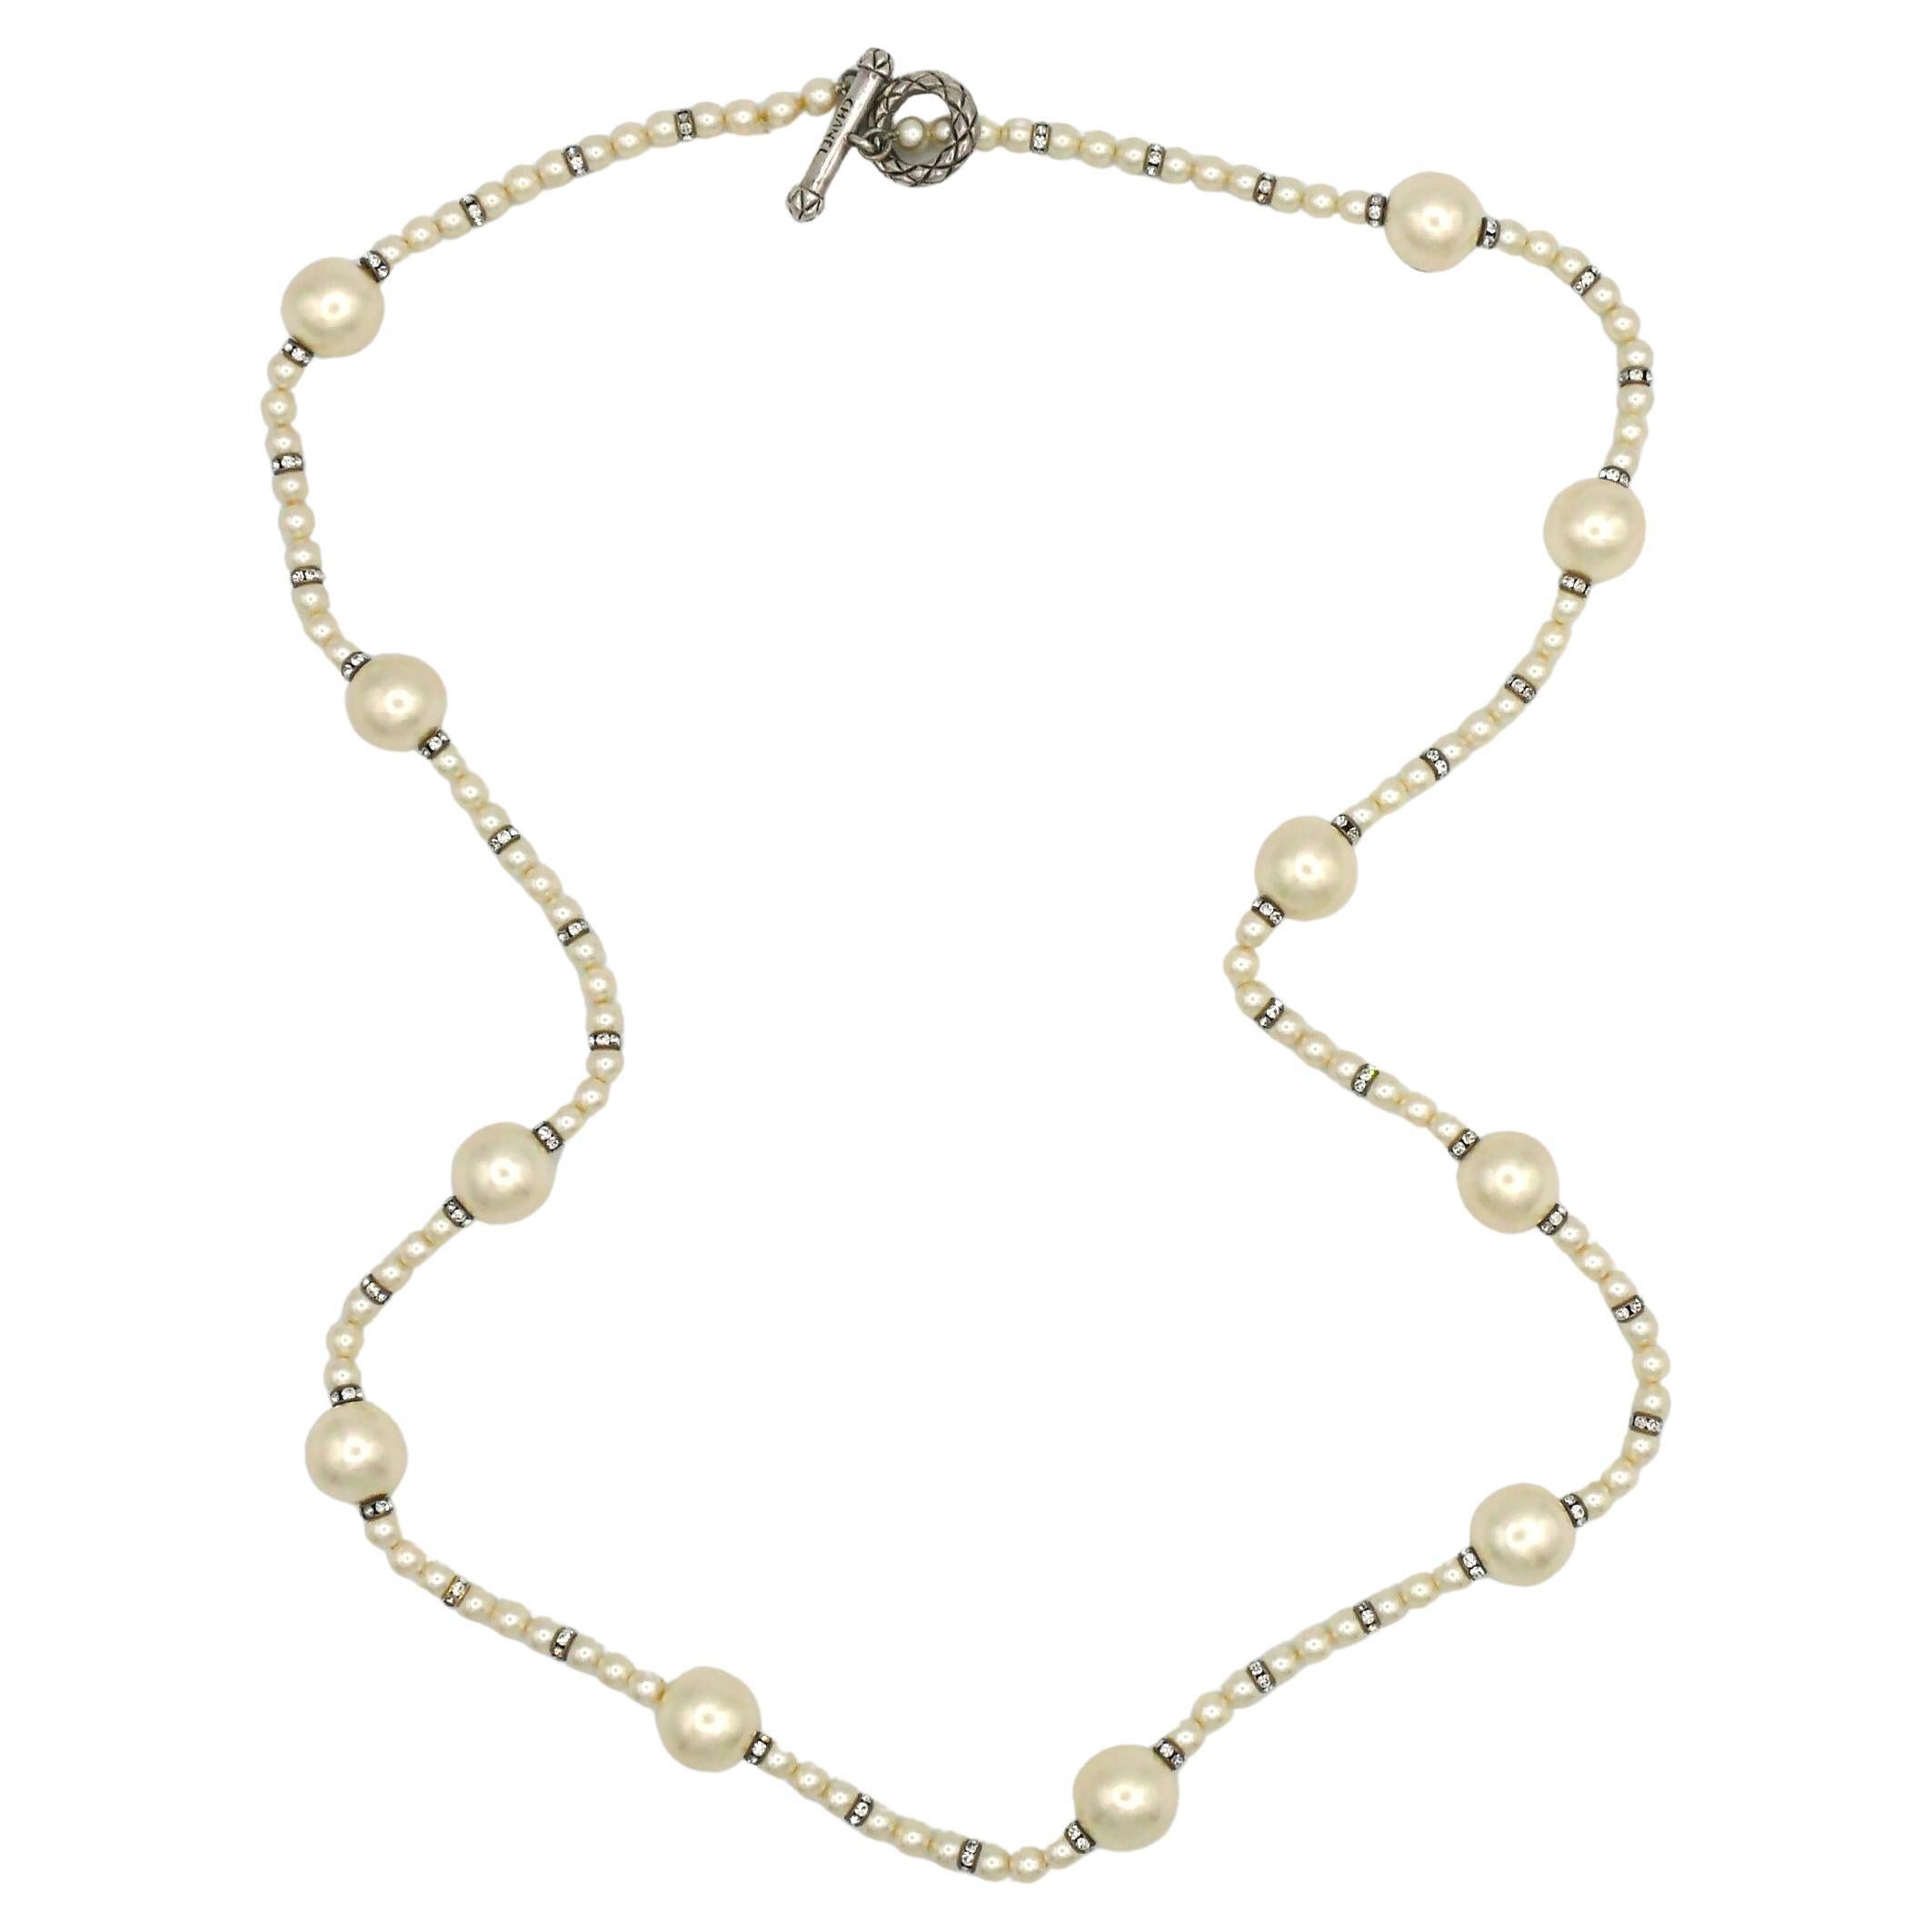 CHANEL by KARL LAGERFELD Vintage Faux Pearl and Crystal Necklace, Fall 1993 For Sale